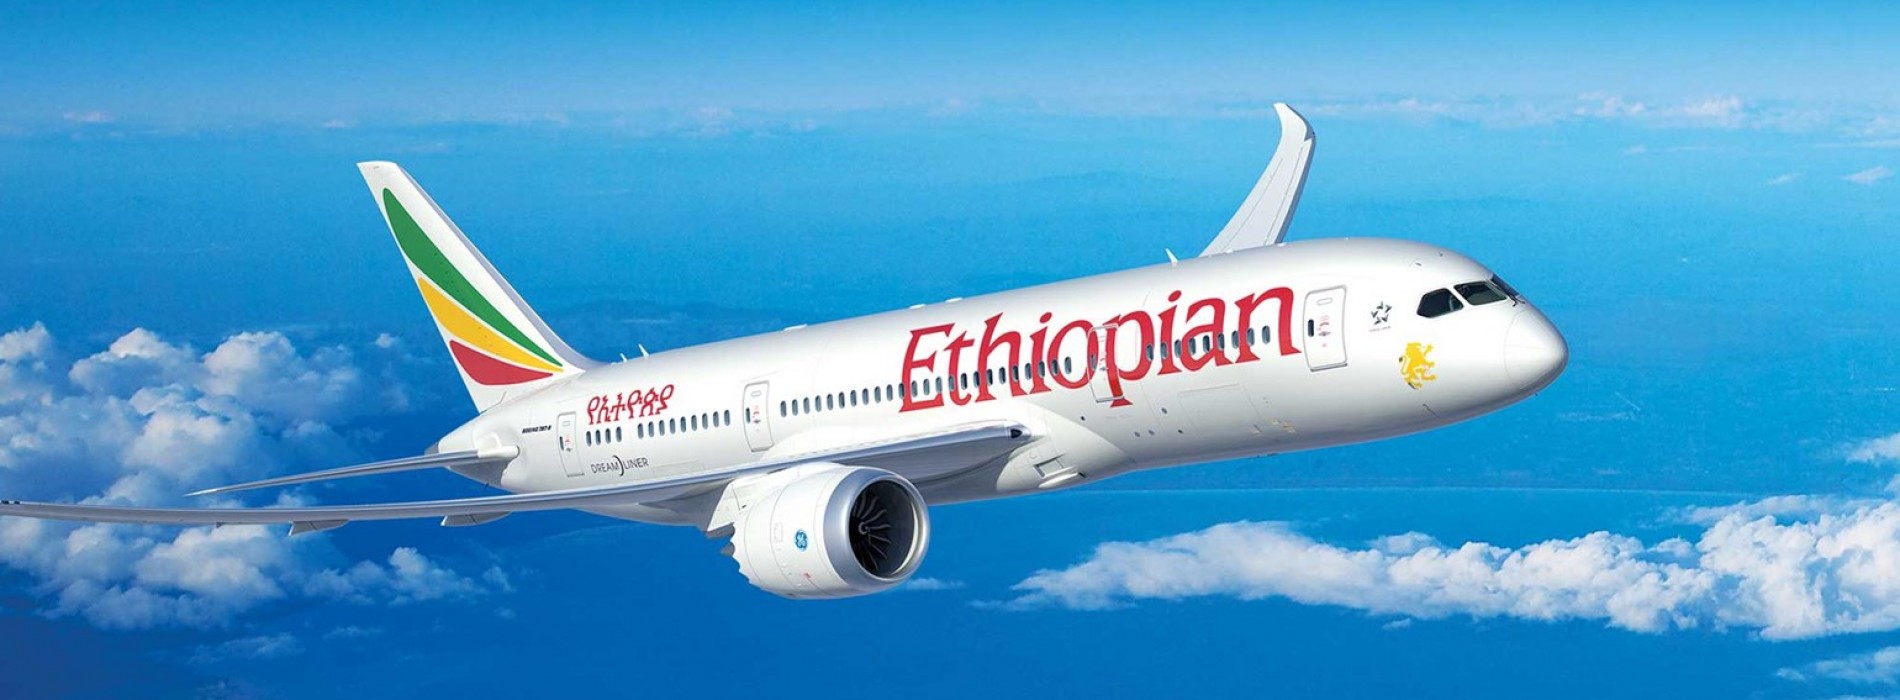 Ethiopian Airlines wins 2018 Africa’s outstanding food services award